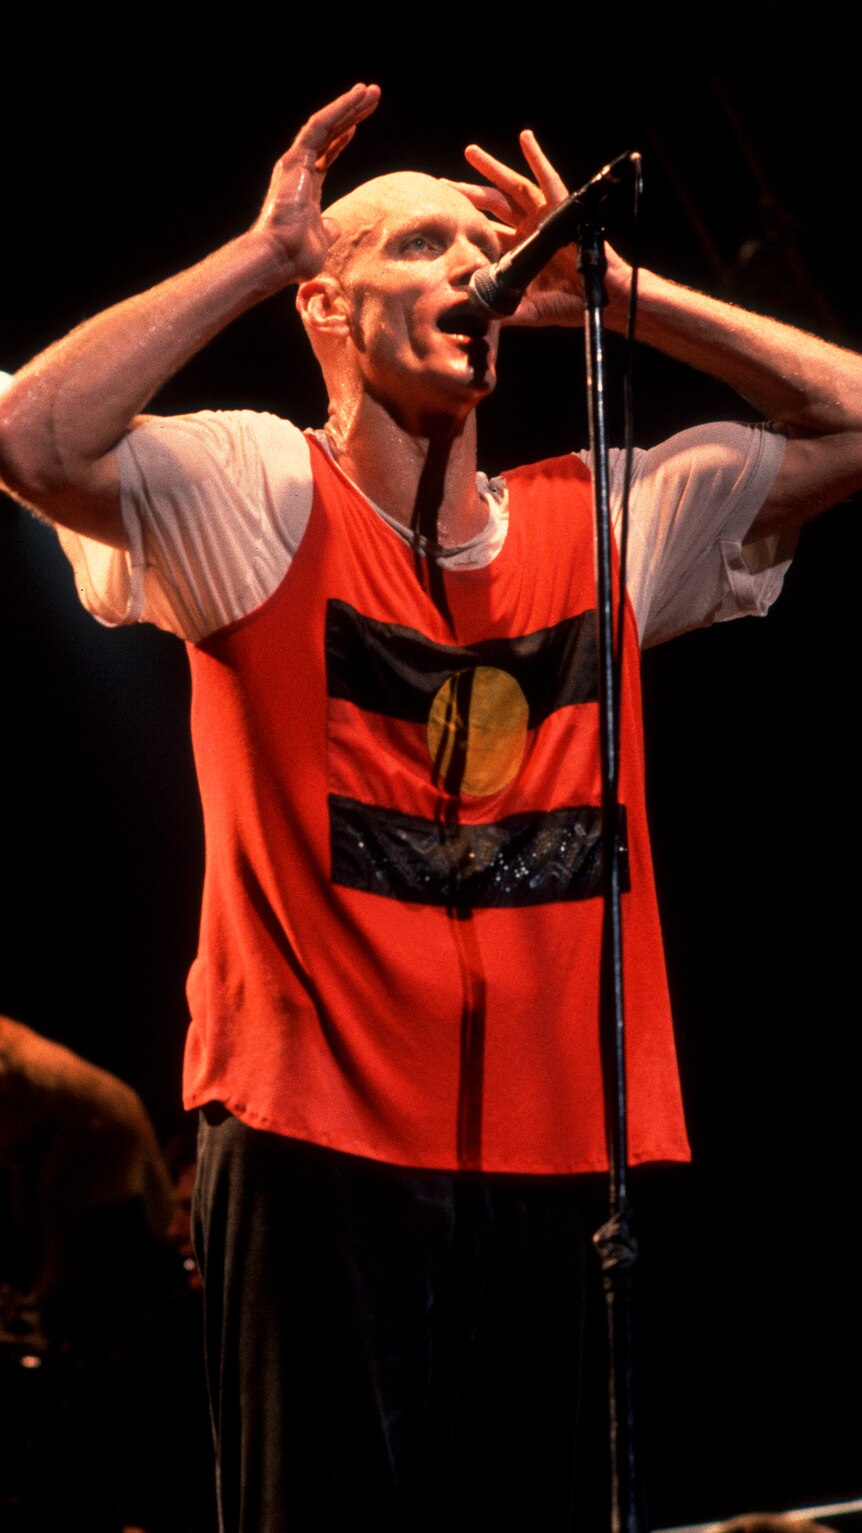 Peter Garrett sings into microphone. He is wearing black pants and a shirt that has an image of Aboriginal flag